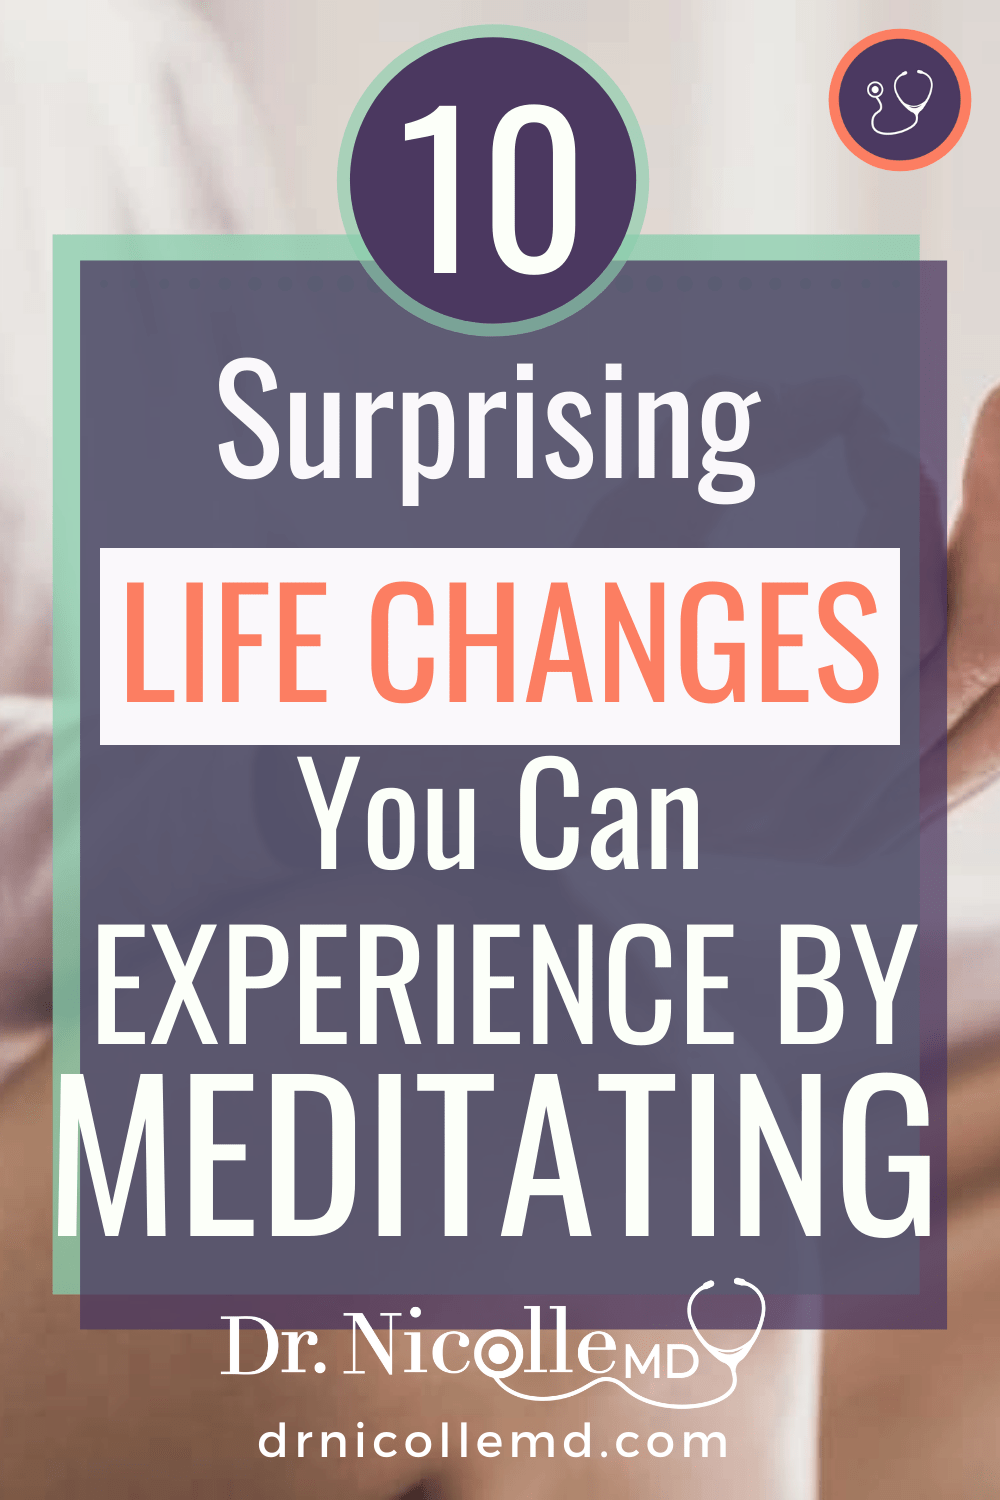 Top 10 Surprising Life Changes You Can Experience by Meditating